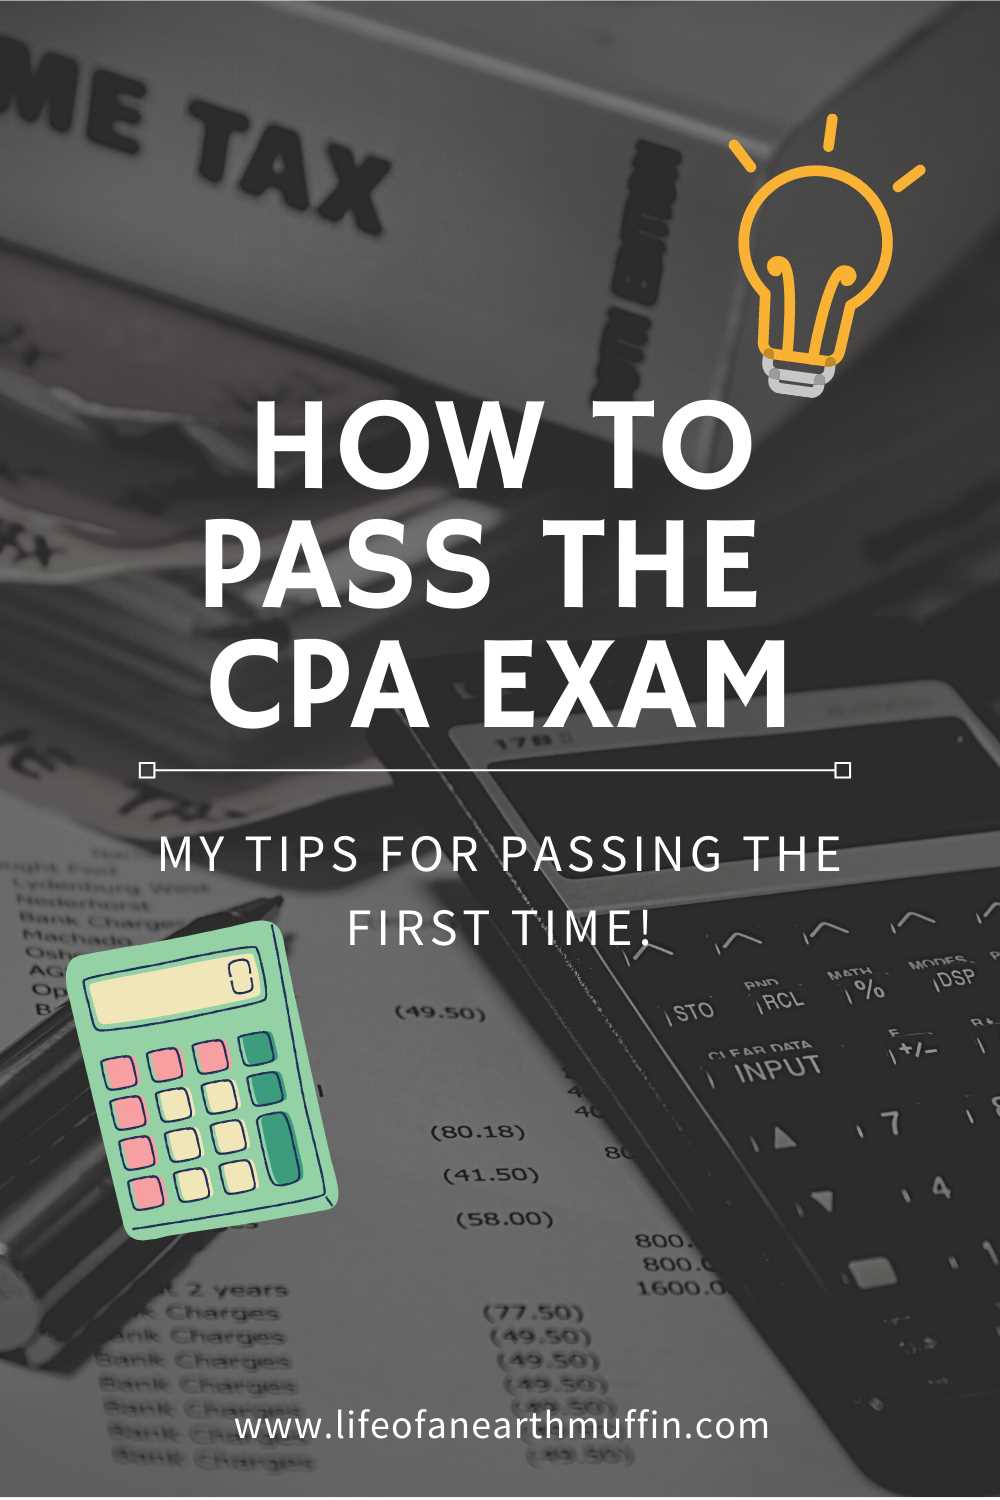 CPA Exam Sections and Format